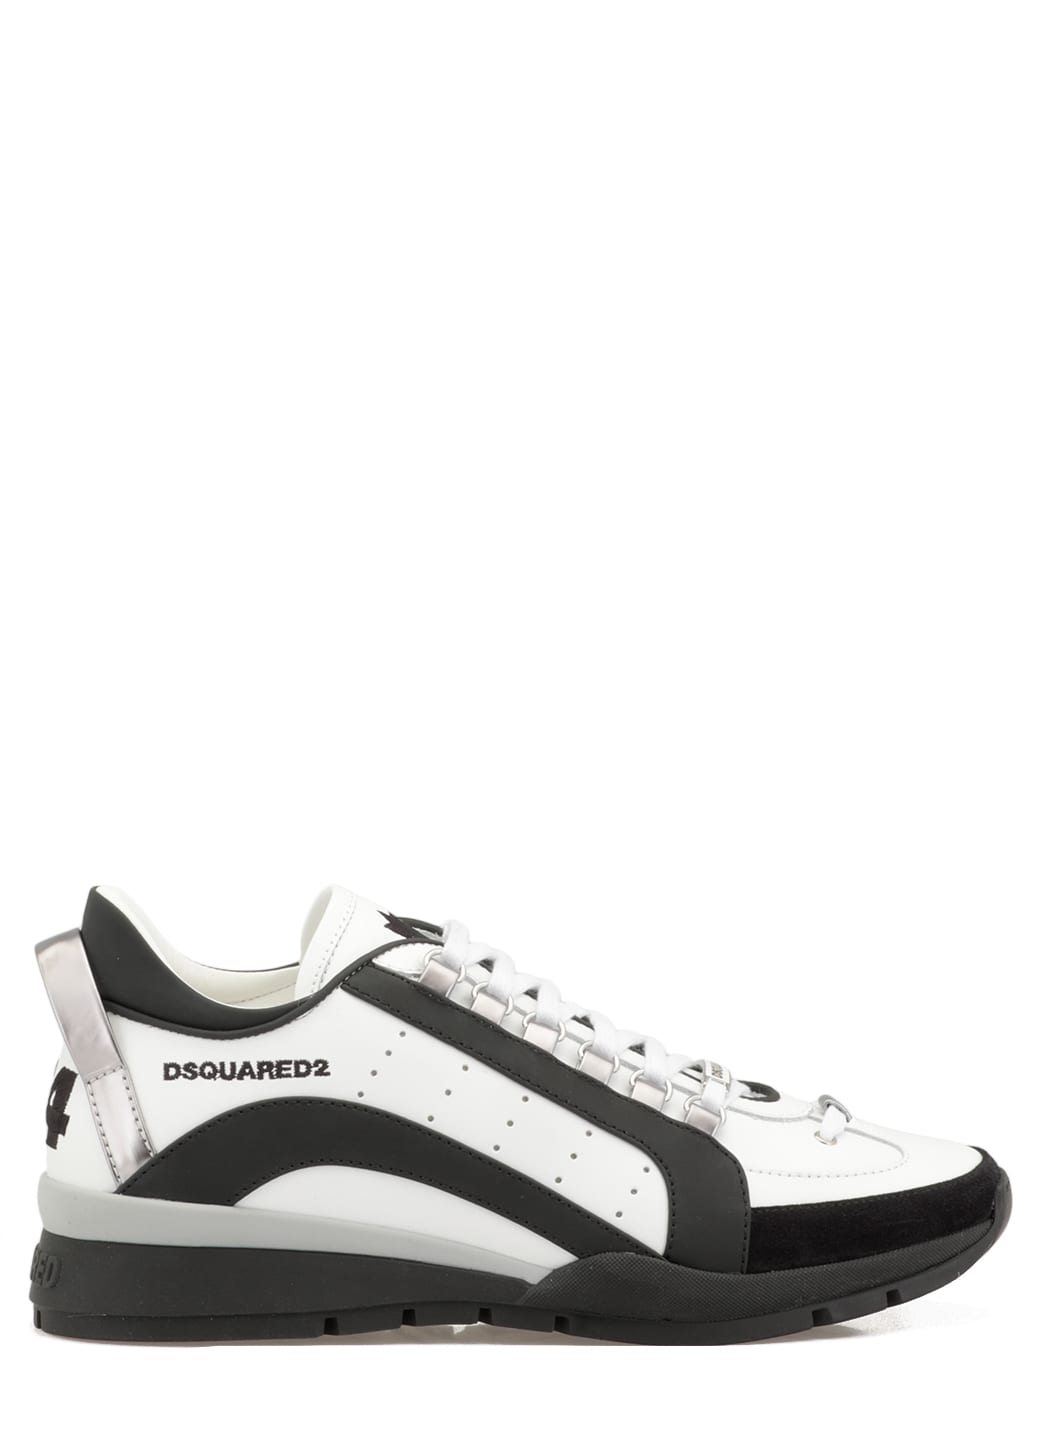 Dsquared2 Leather Dsqaured2 Sneakers